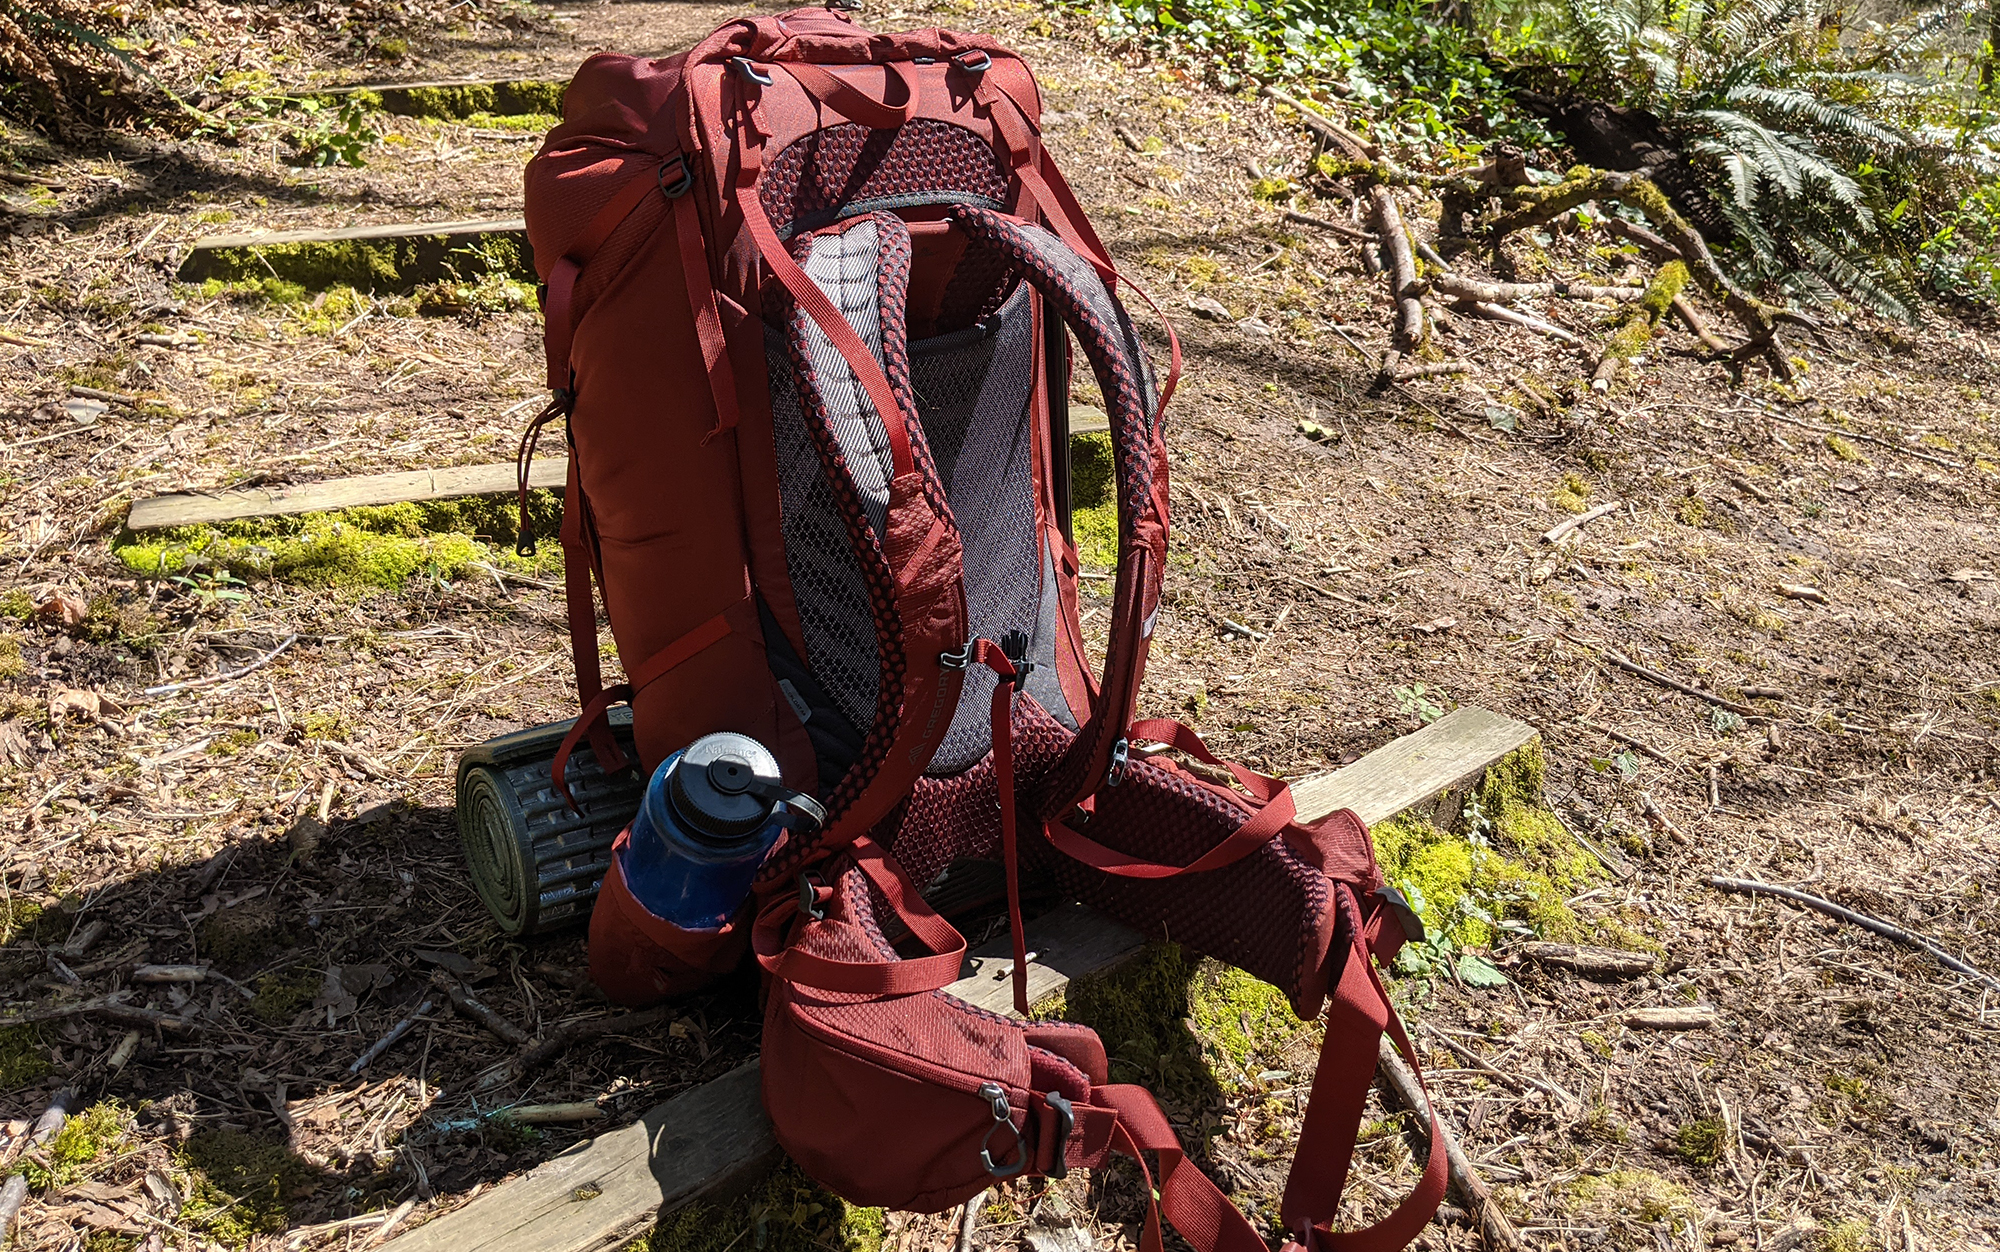 The Gregory Baltoro has a lot of adjustable sizing options.